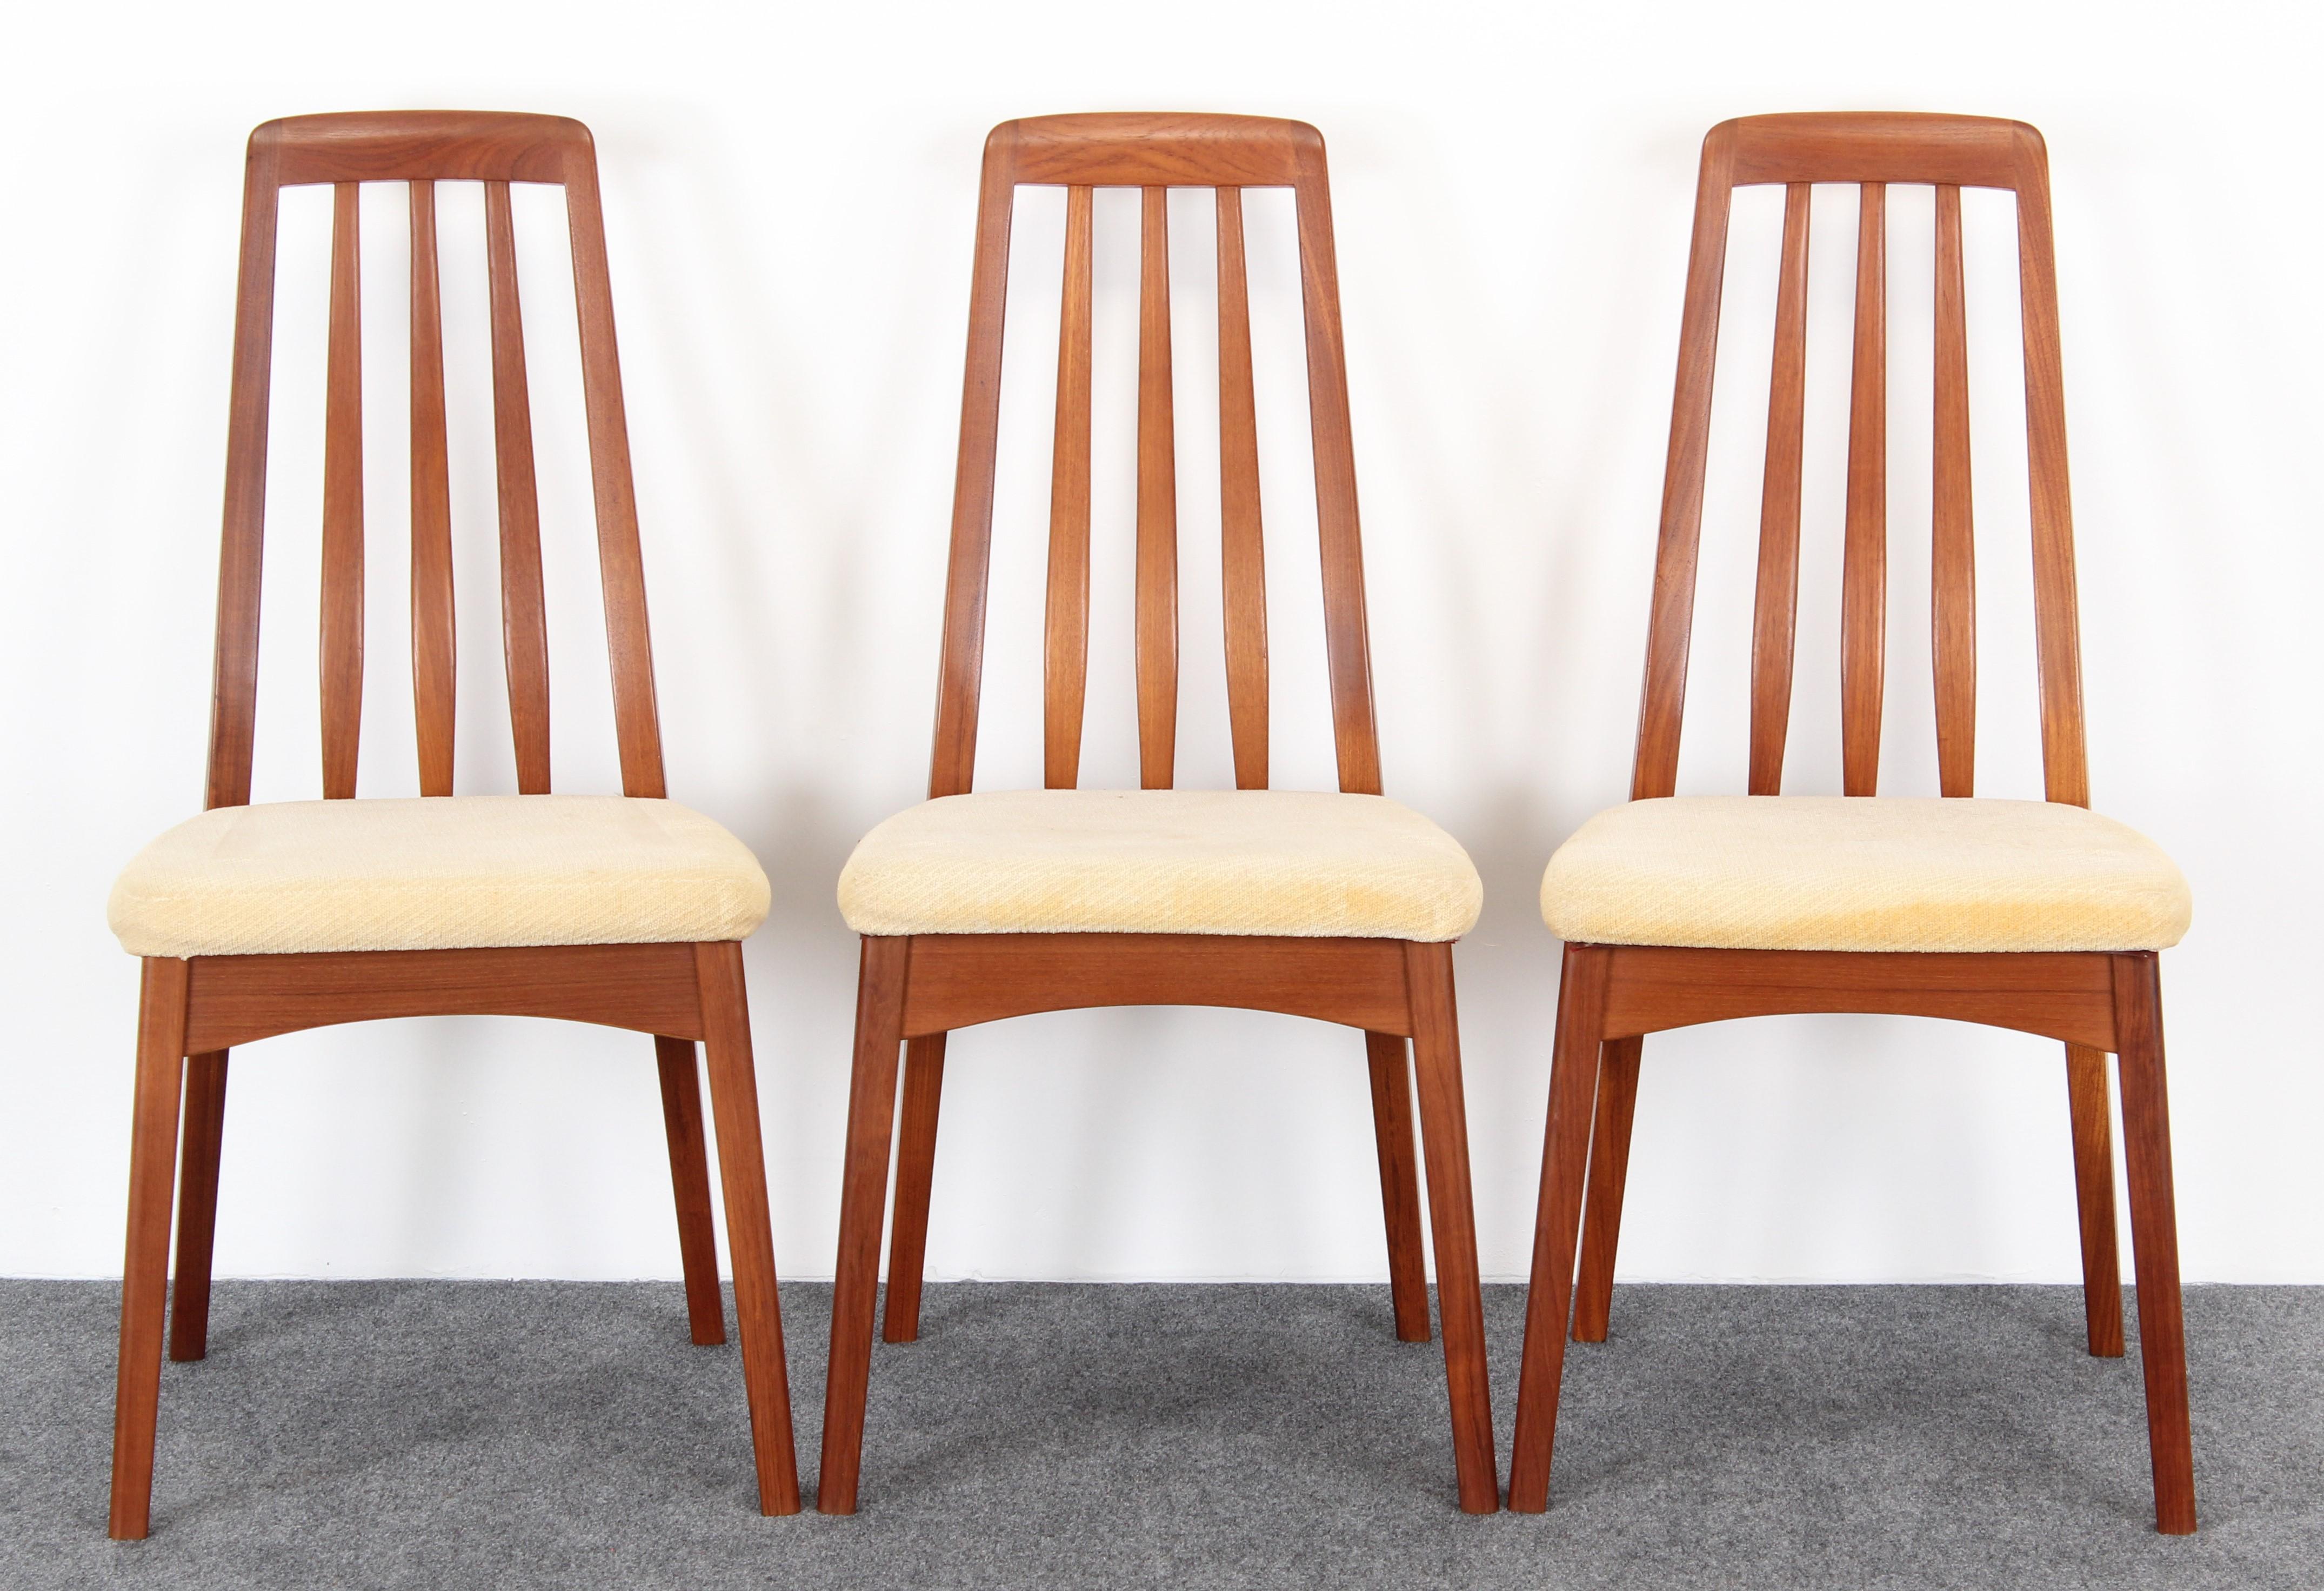 A set of six Benny Linden Danish style Mid-Century Modern teak dining chairs from the 1960s. Structurally sound. New upholstery recommended.

Chair dimensions: 37.75